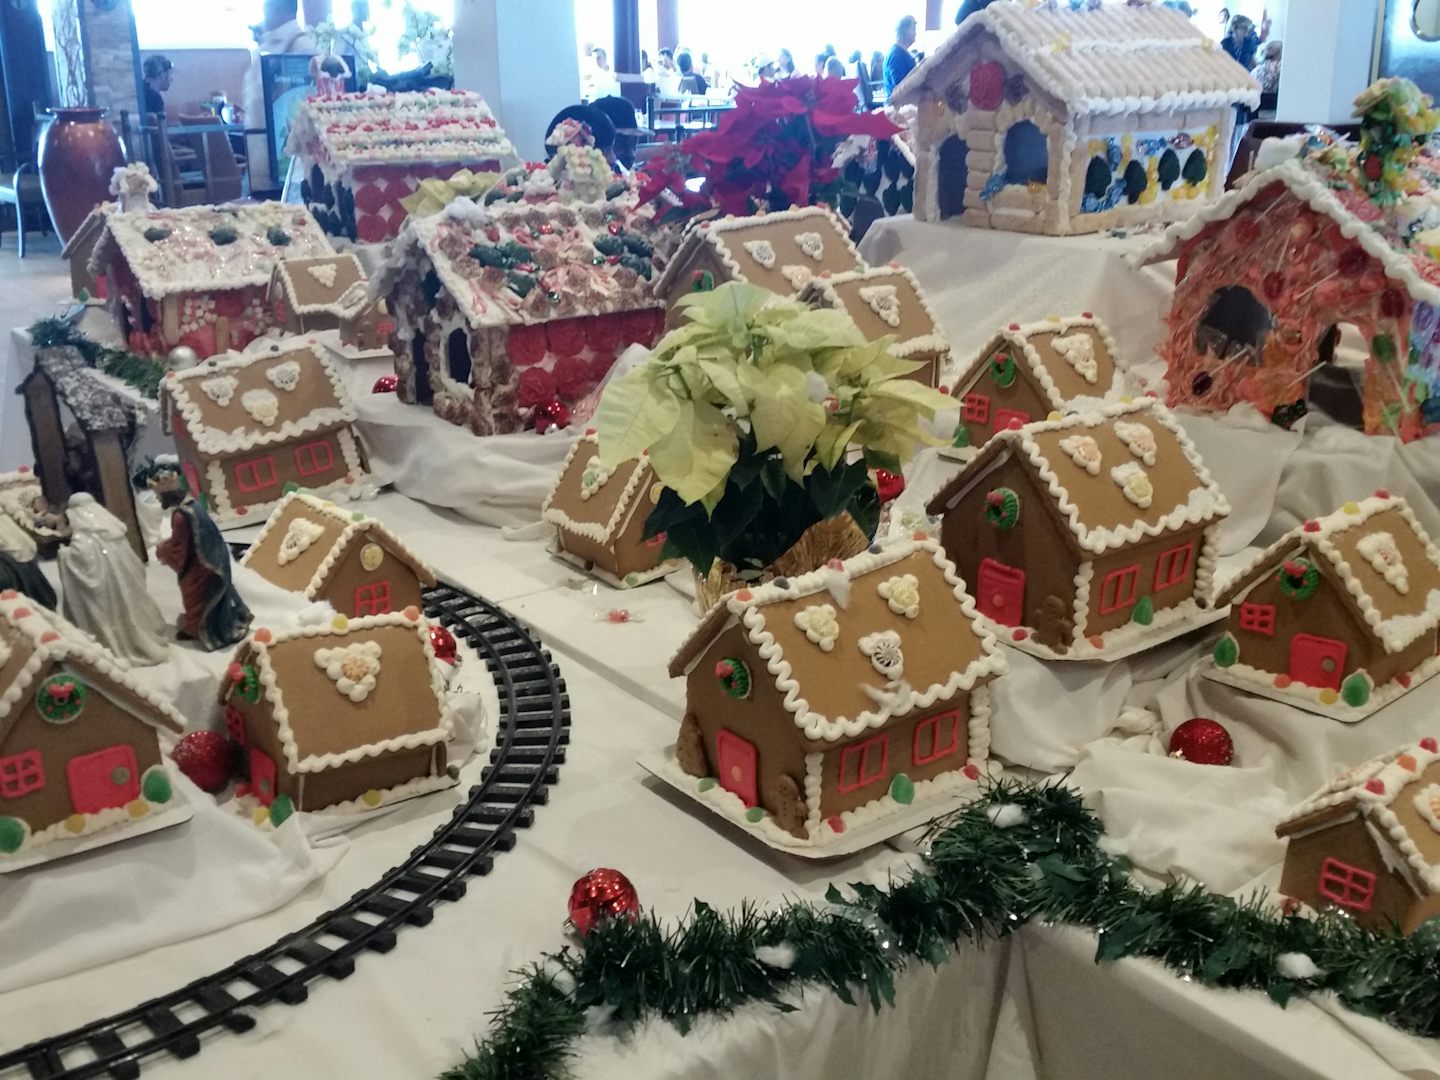 Gingerbread Houses in Windjammer mess hall